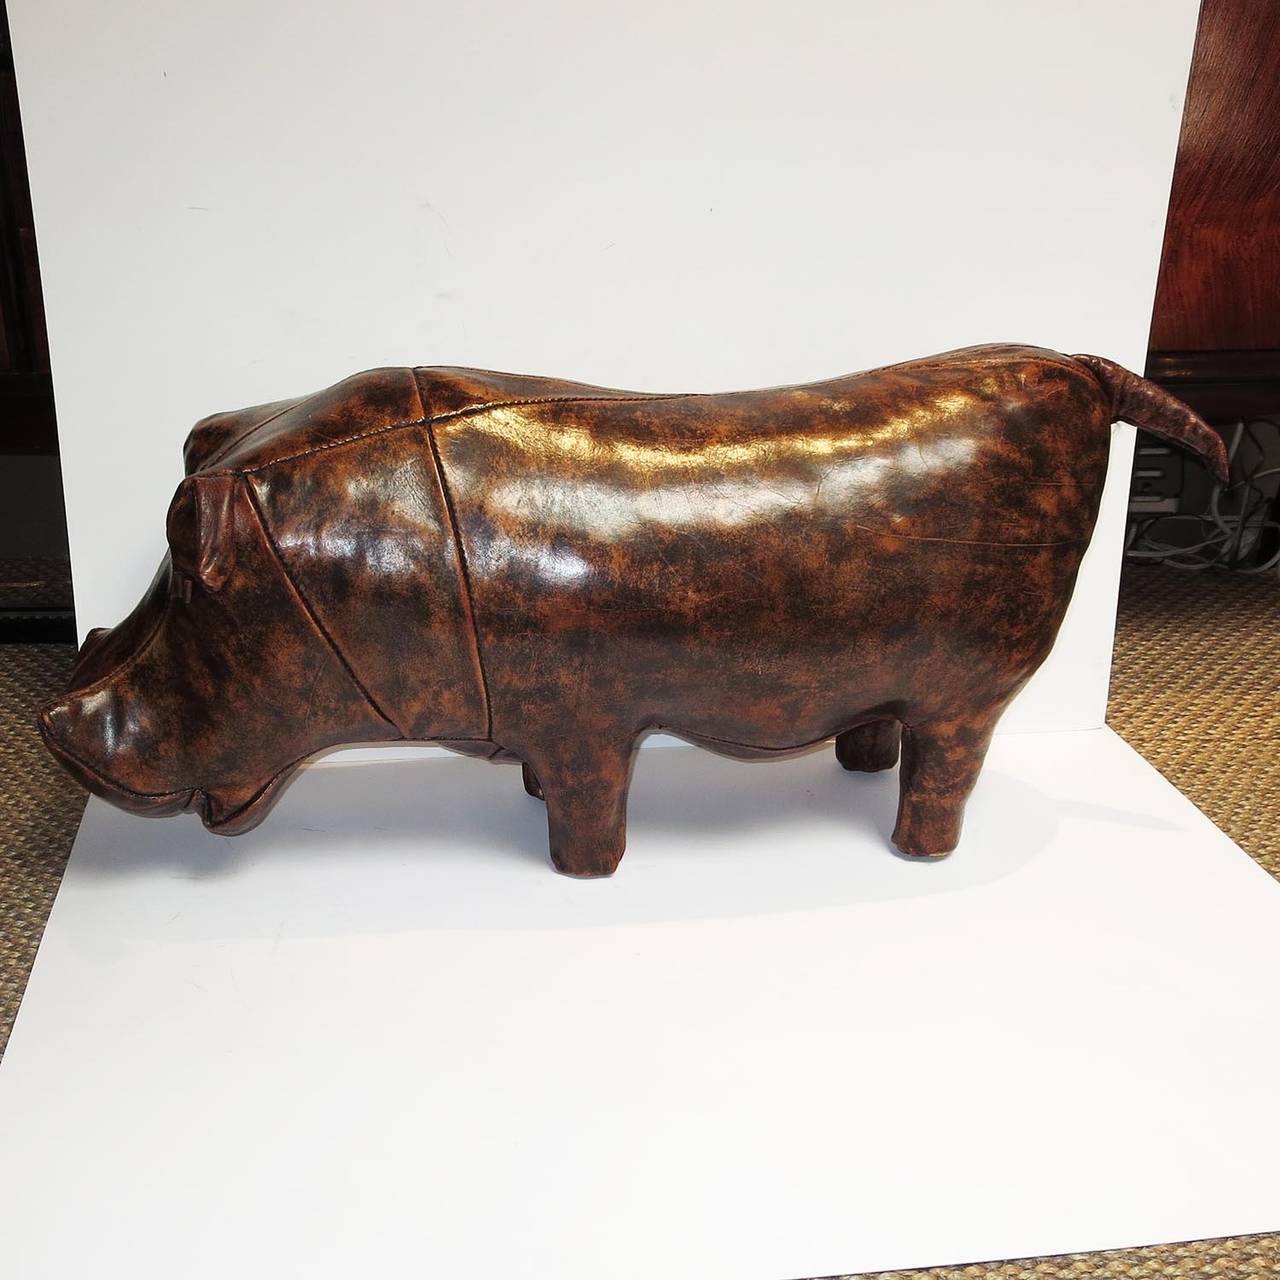 This lovely hippo was custom created as a footstool for the Abercrombie & Fitch stores in the 1960s. The stitched panels are heavy pigskin leather, and the overall condition is one of the best we have seen. It is stamped in the ear 